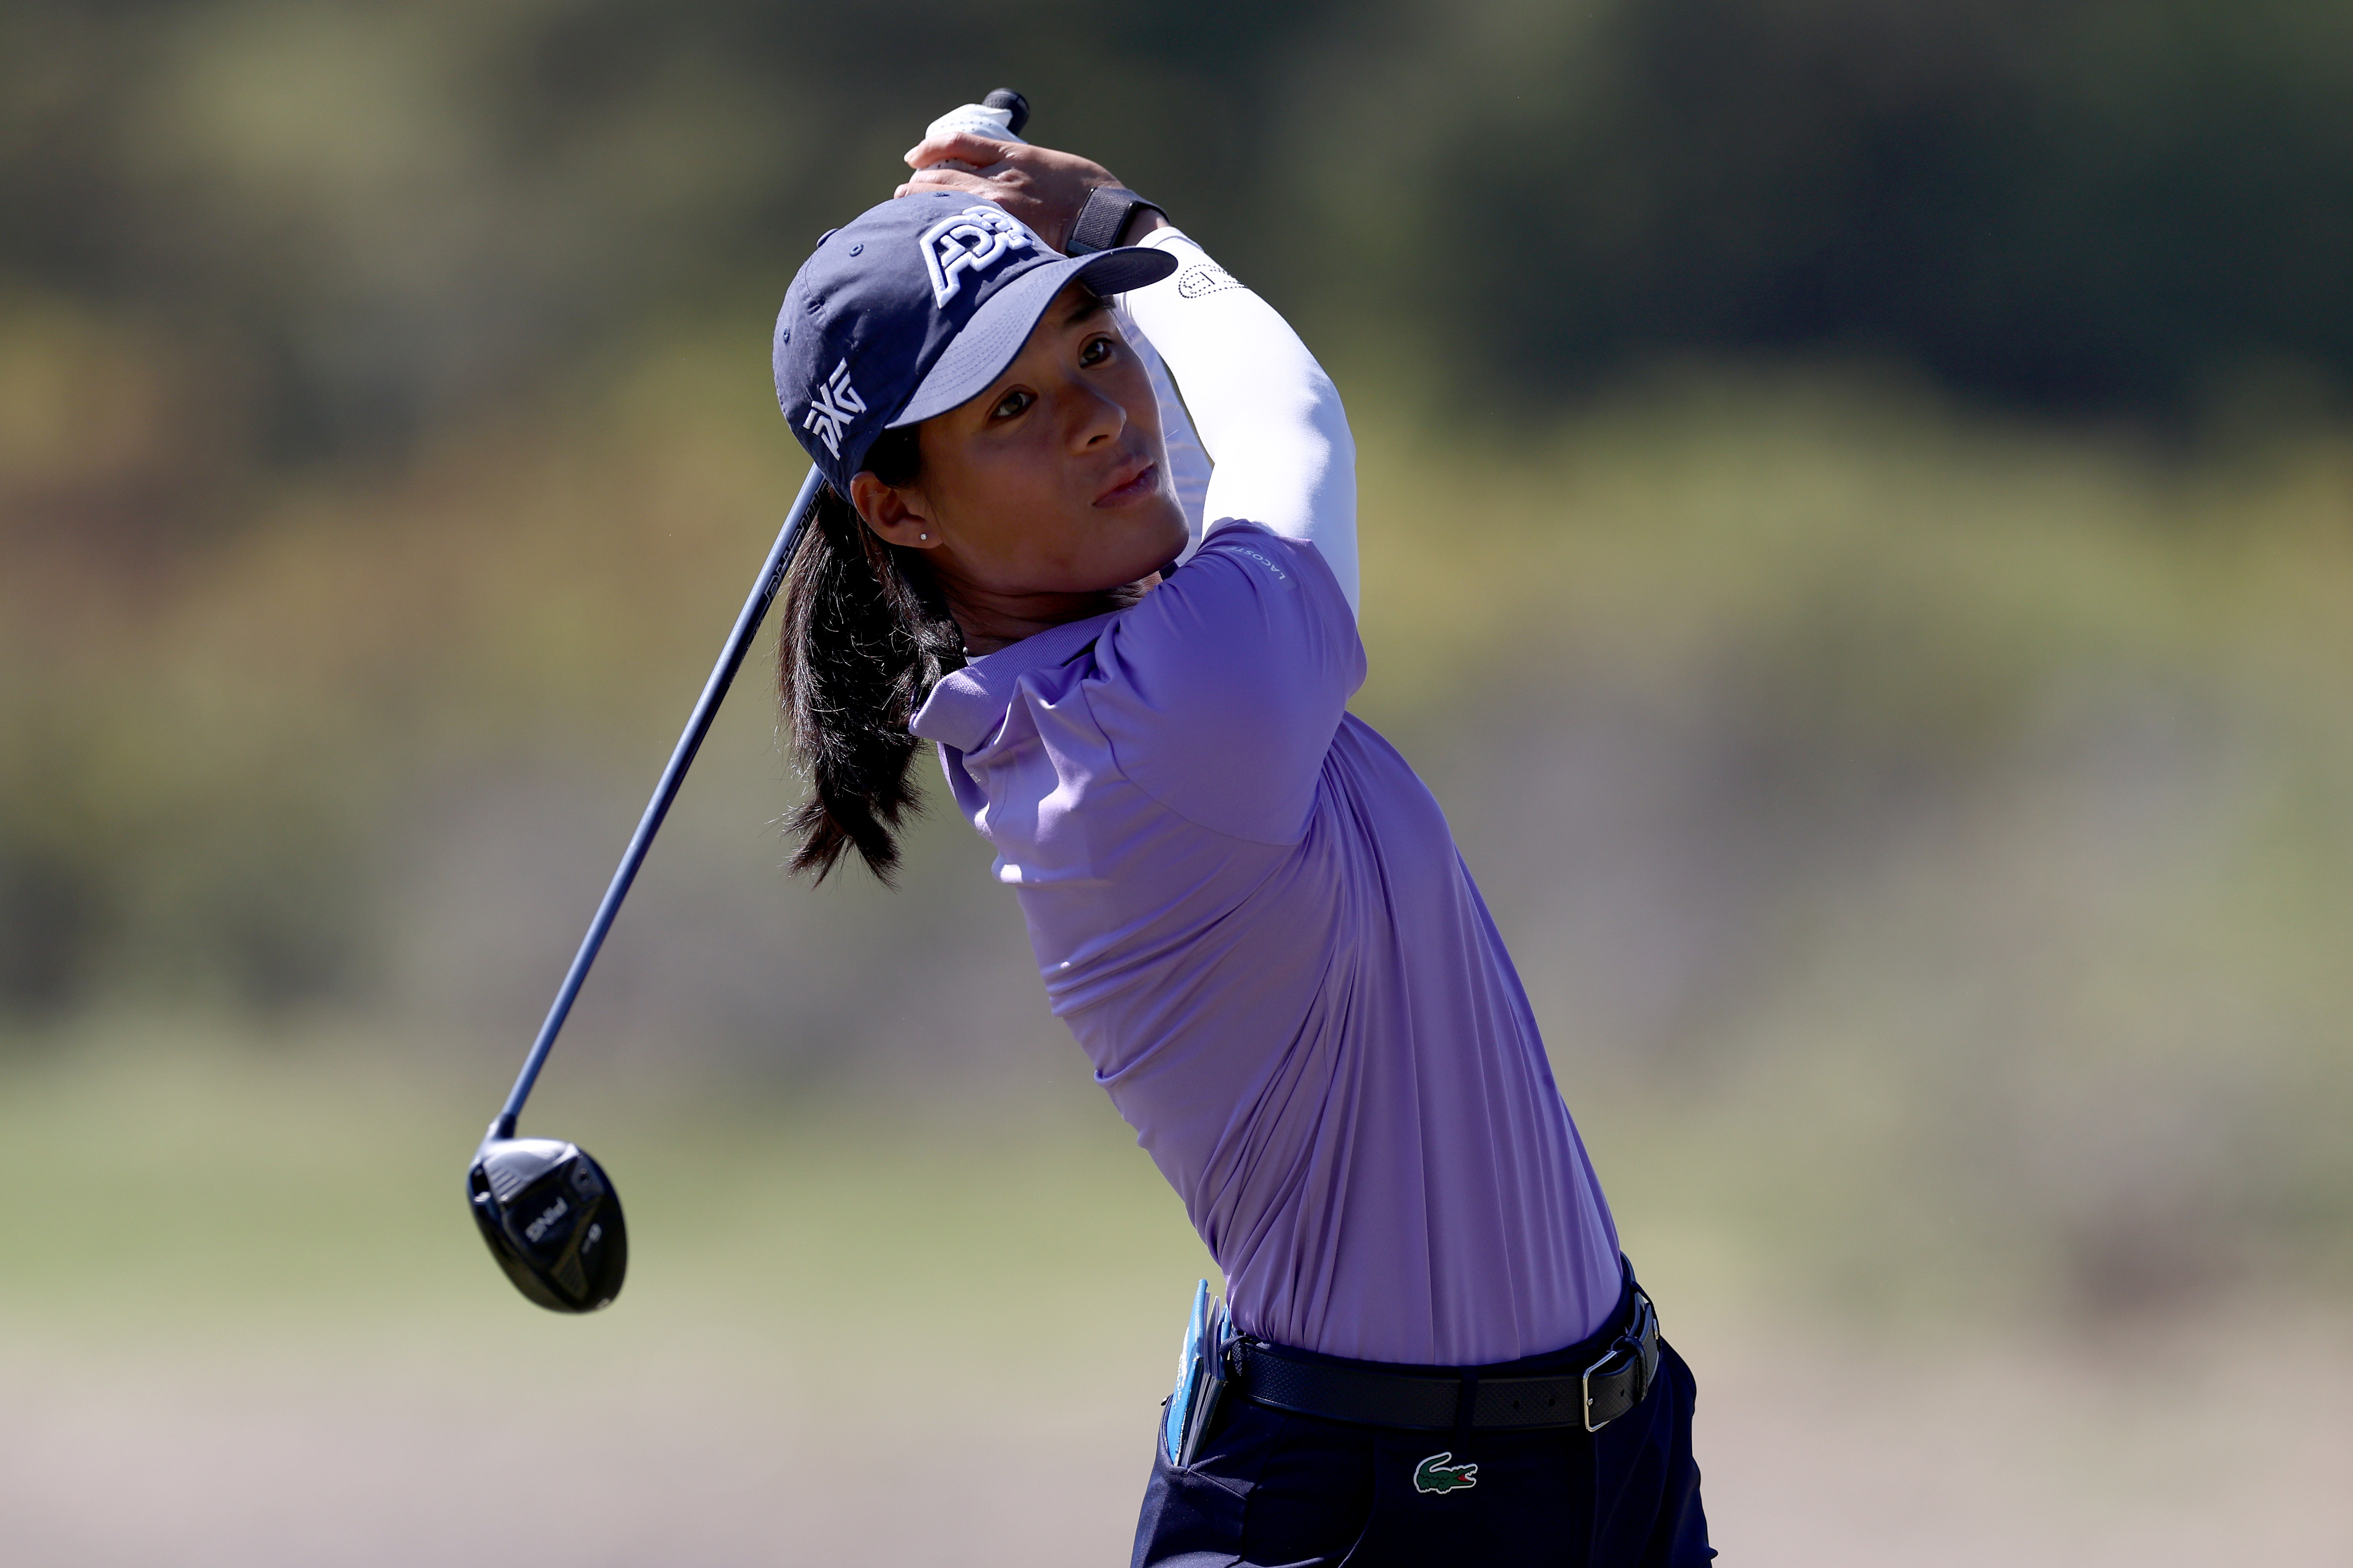 Major Champions, Solheim Cup Participants and World's Top-Ranked Players Headline Field at The 2023 Ascendant LPGA benefiting Volunteers of America